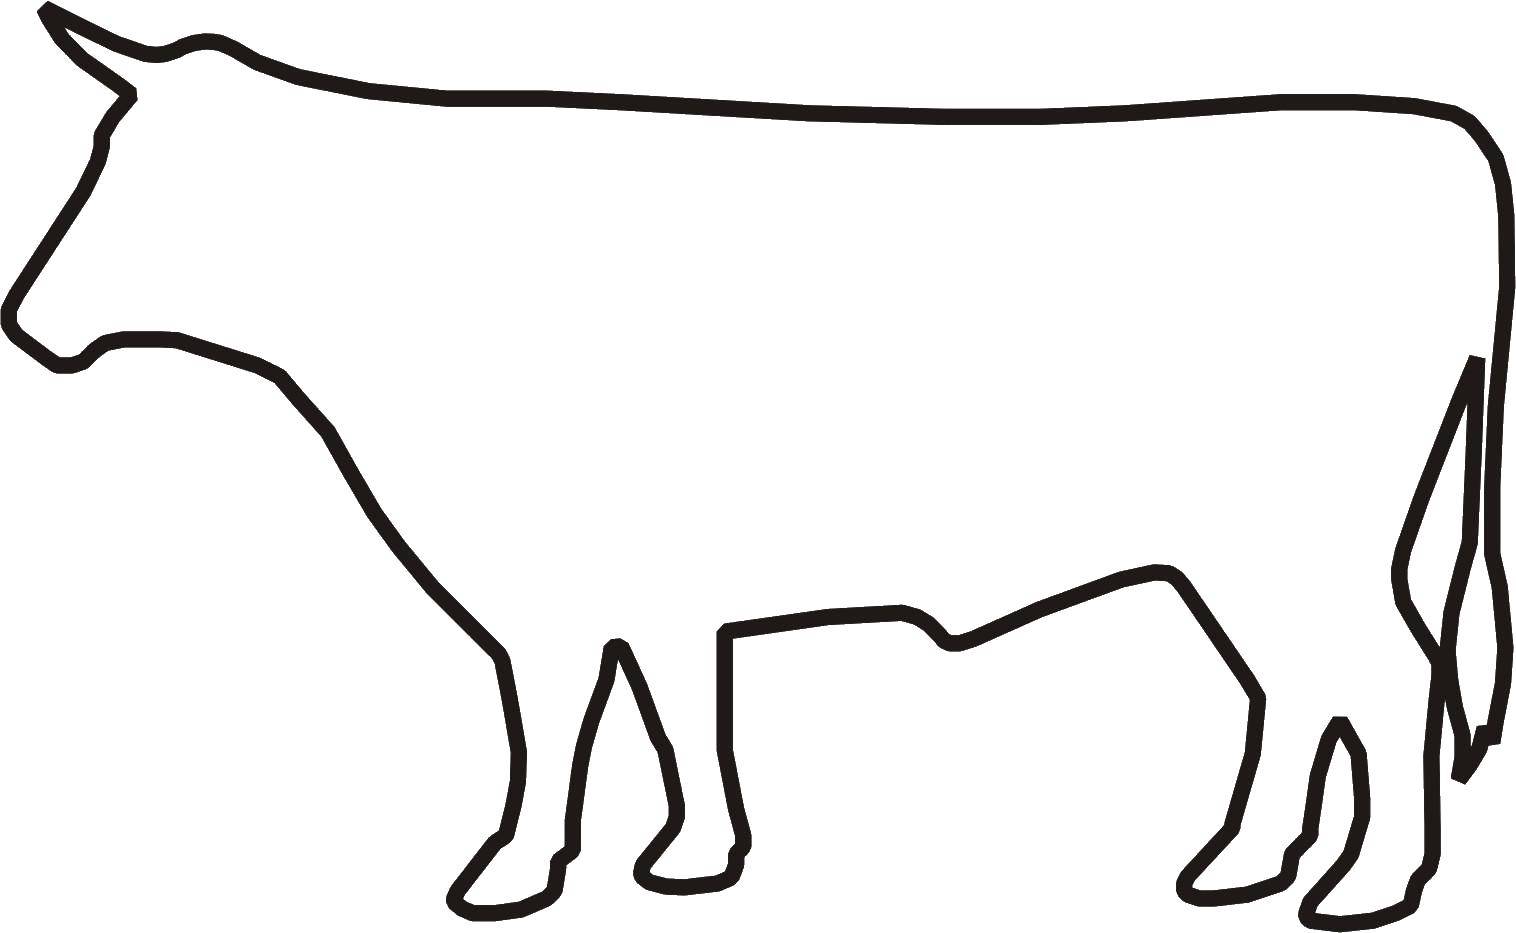 Coloring Cow. Category Pets allowed. Tags:  animals, cattle, cow, milk.